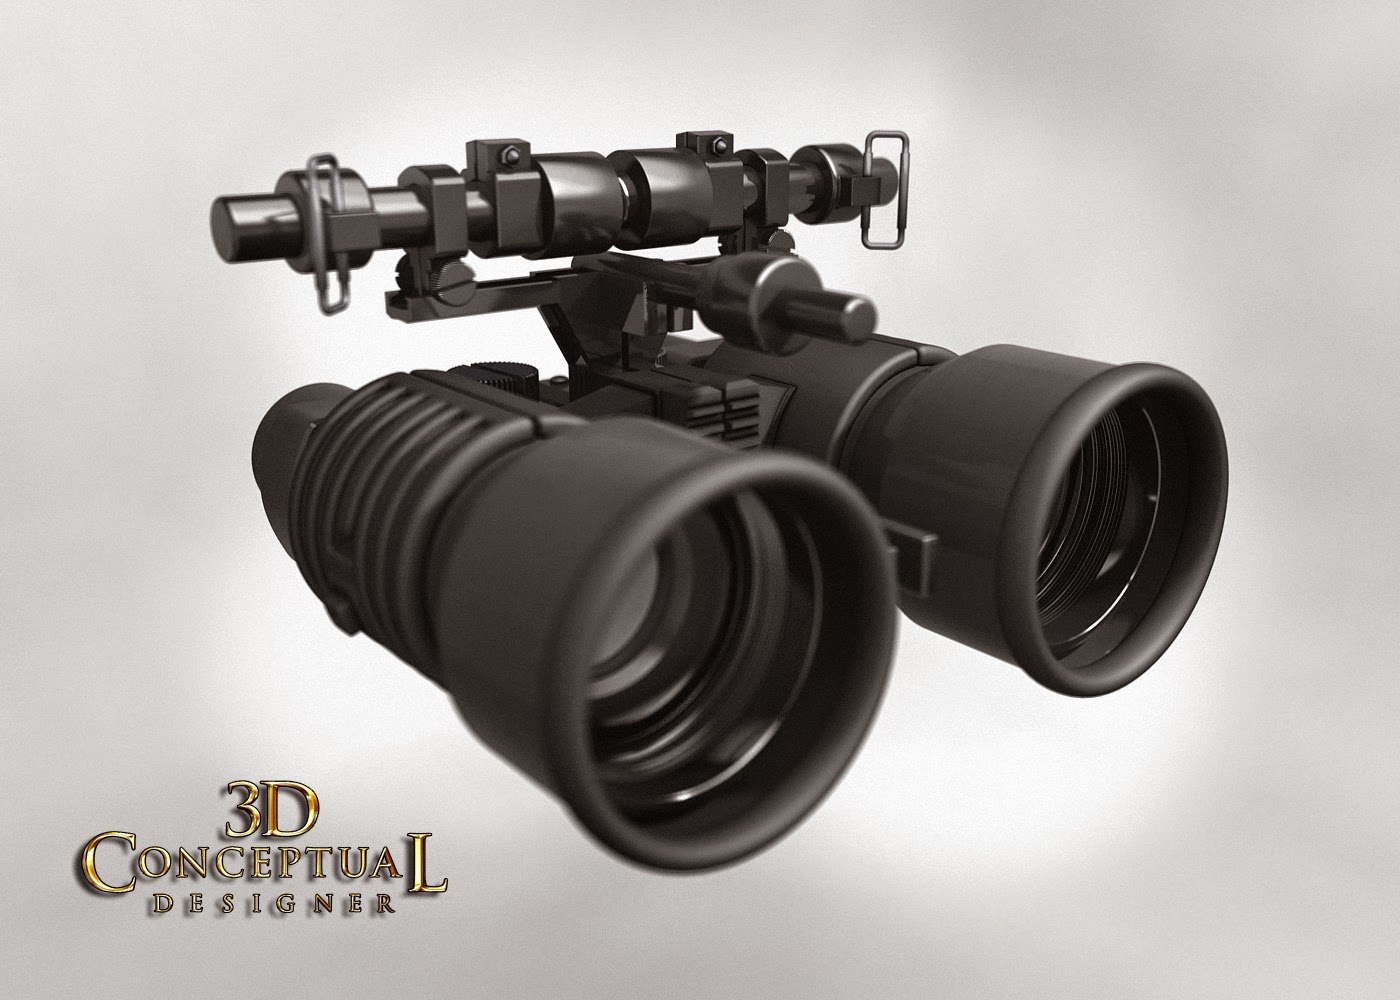 3DconceptualdesignerBlog: Project Review: .T. The Movie 2003 PART IV  Night-Vision Binocular Model for MGFX Teaser Trailer